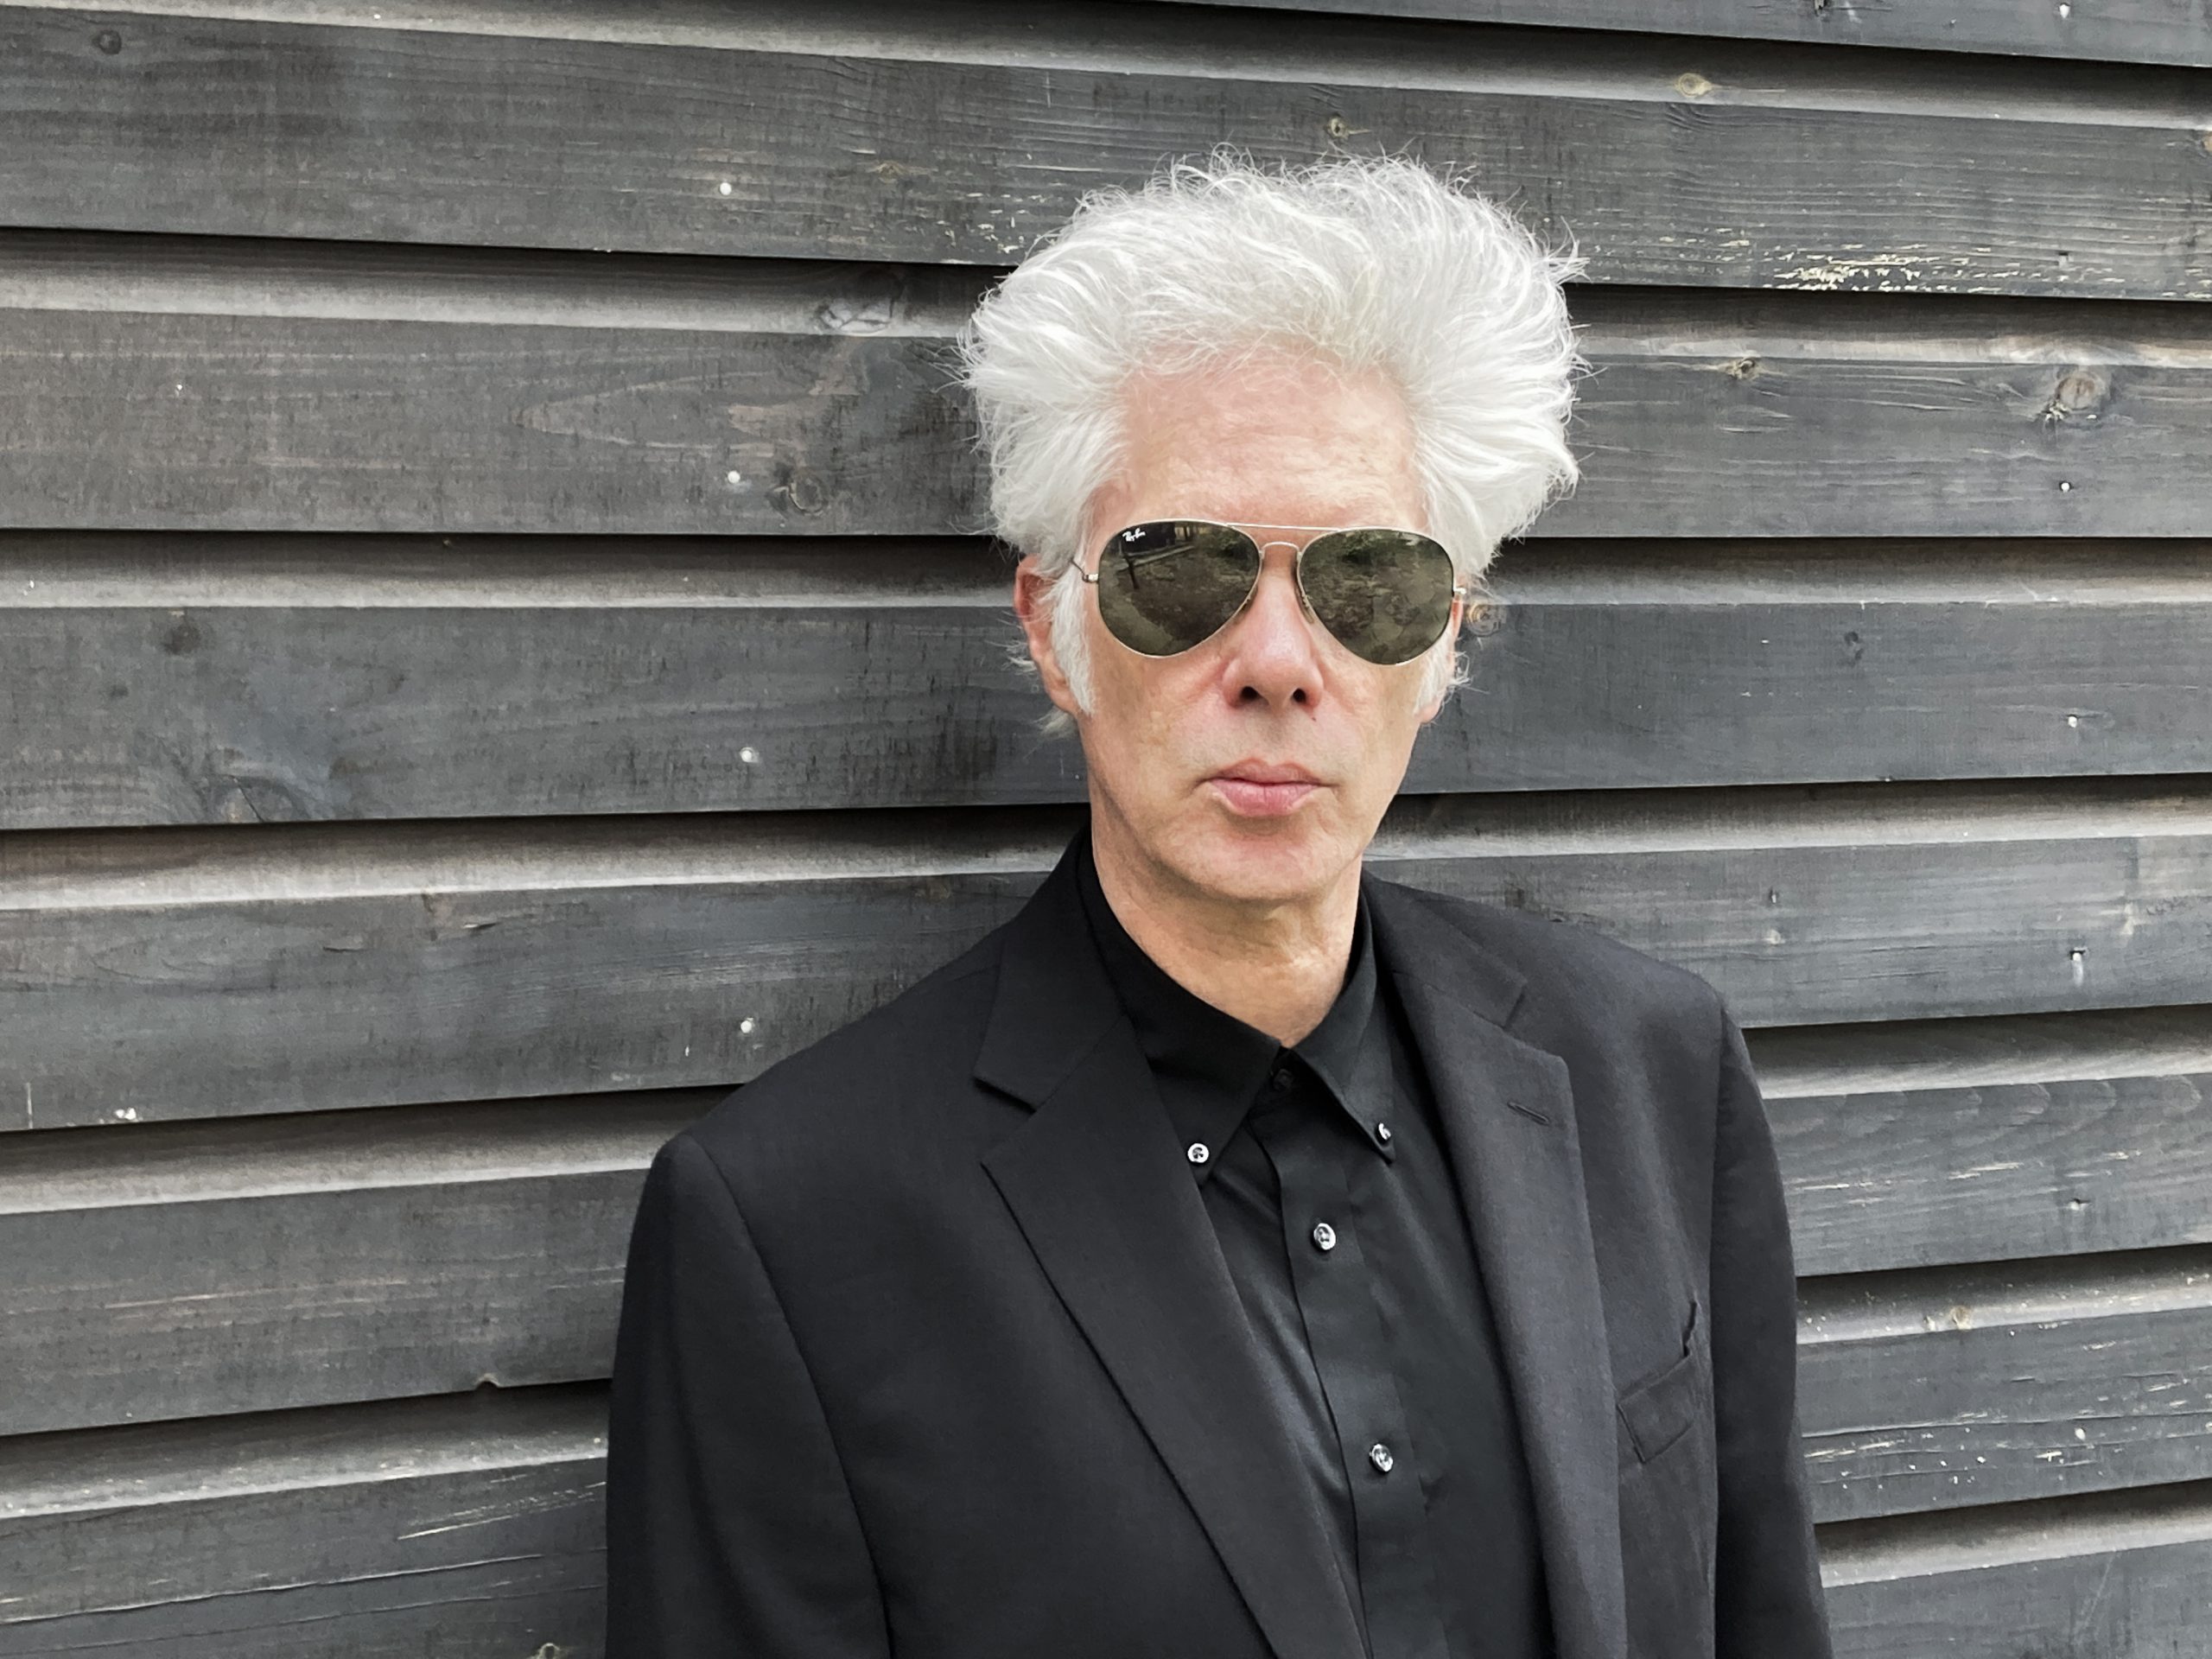 Jim Jarmusch. Photography courtesy of Anthology Editions.